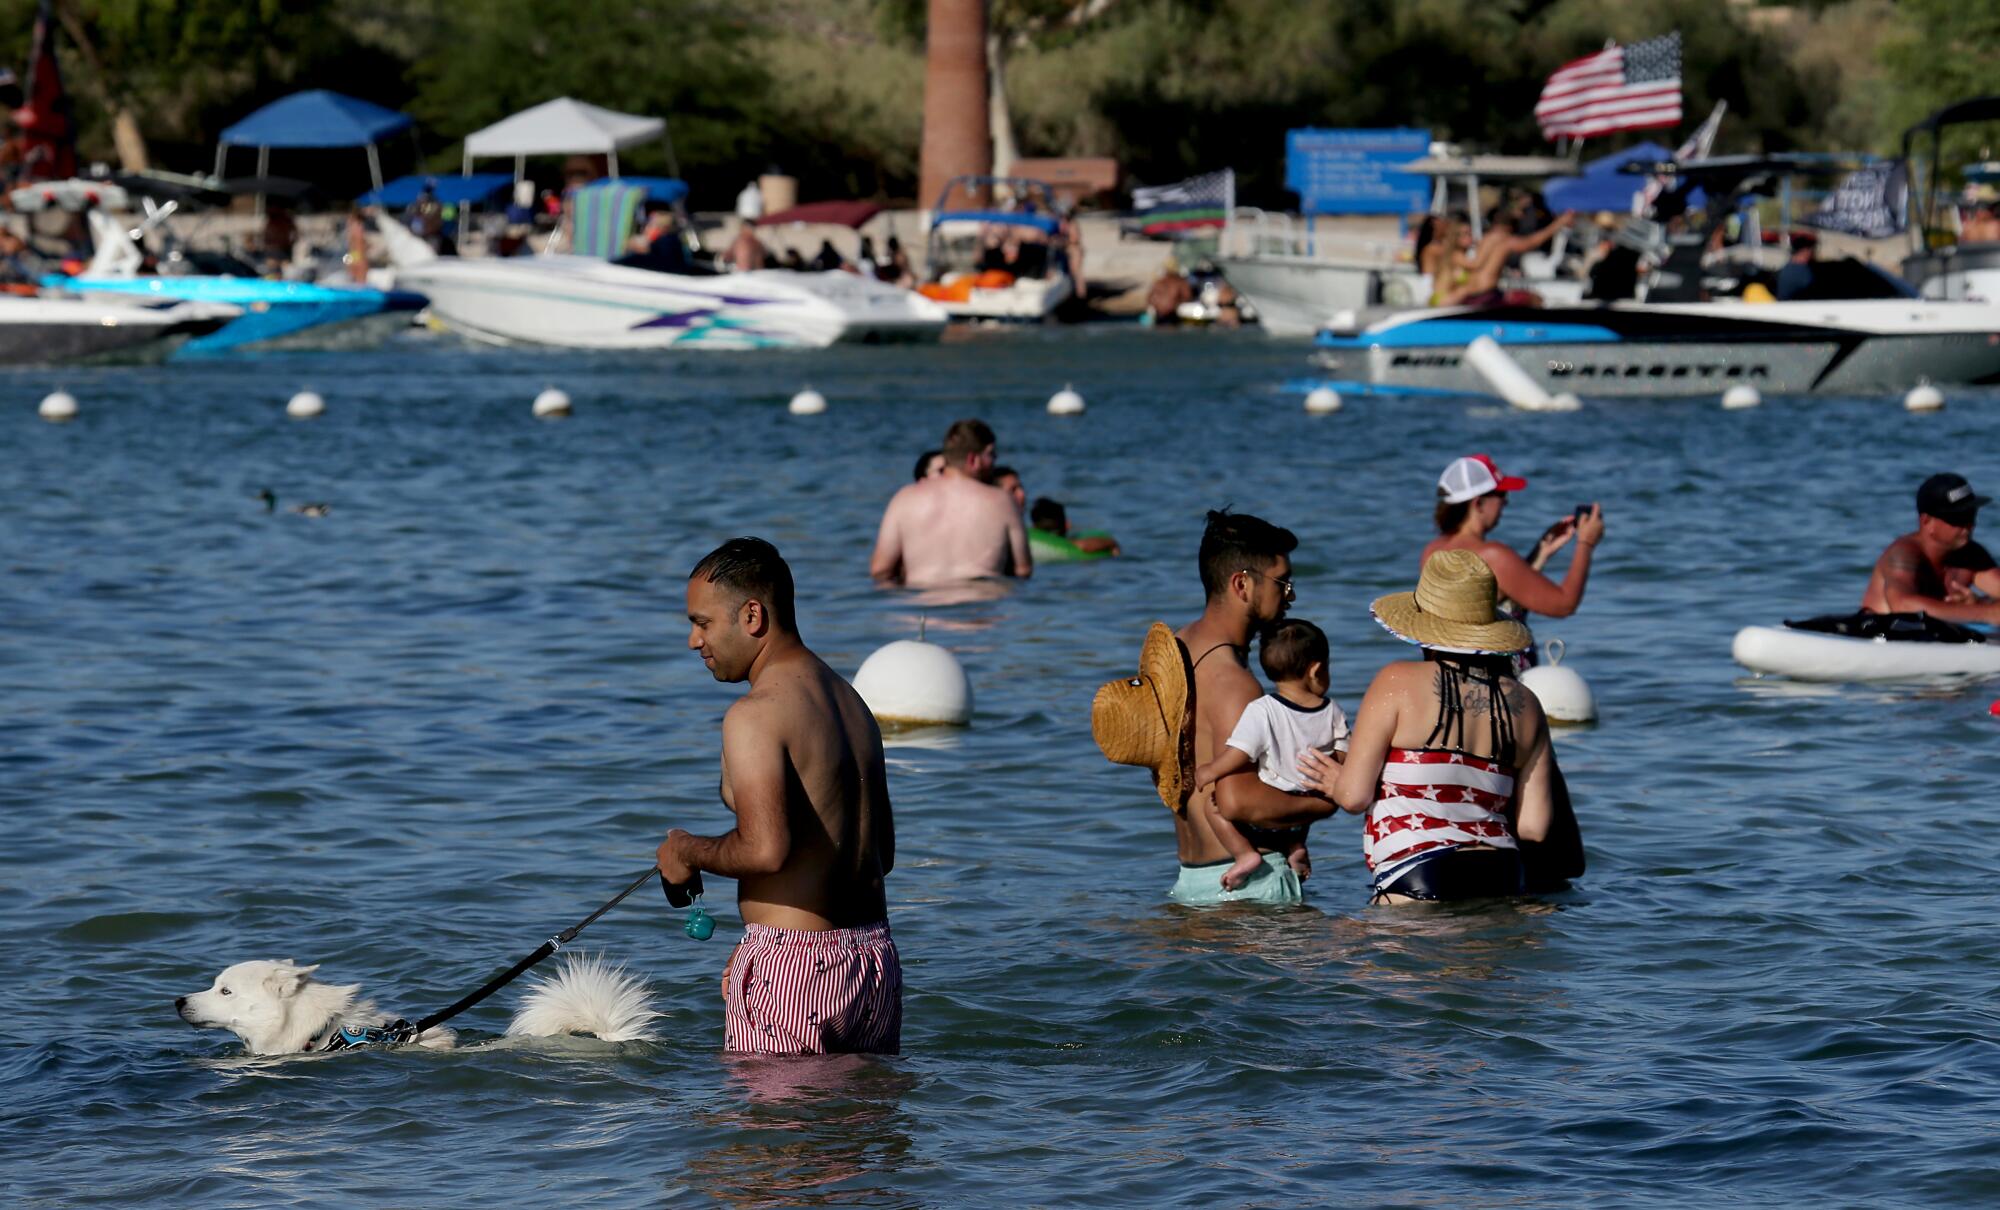 Swimmers take a dip in Lake Havasu during a holiday weekend. About a million people visit the lake each year.